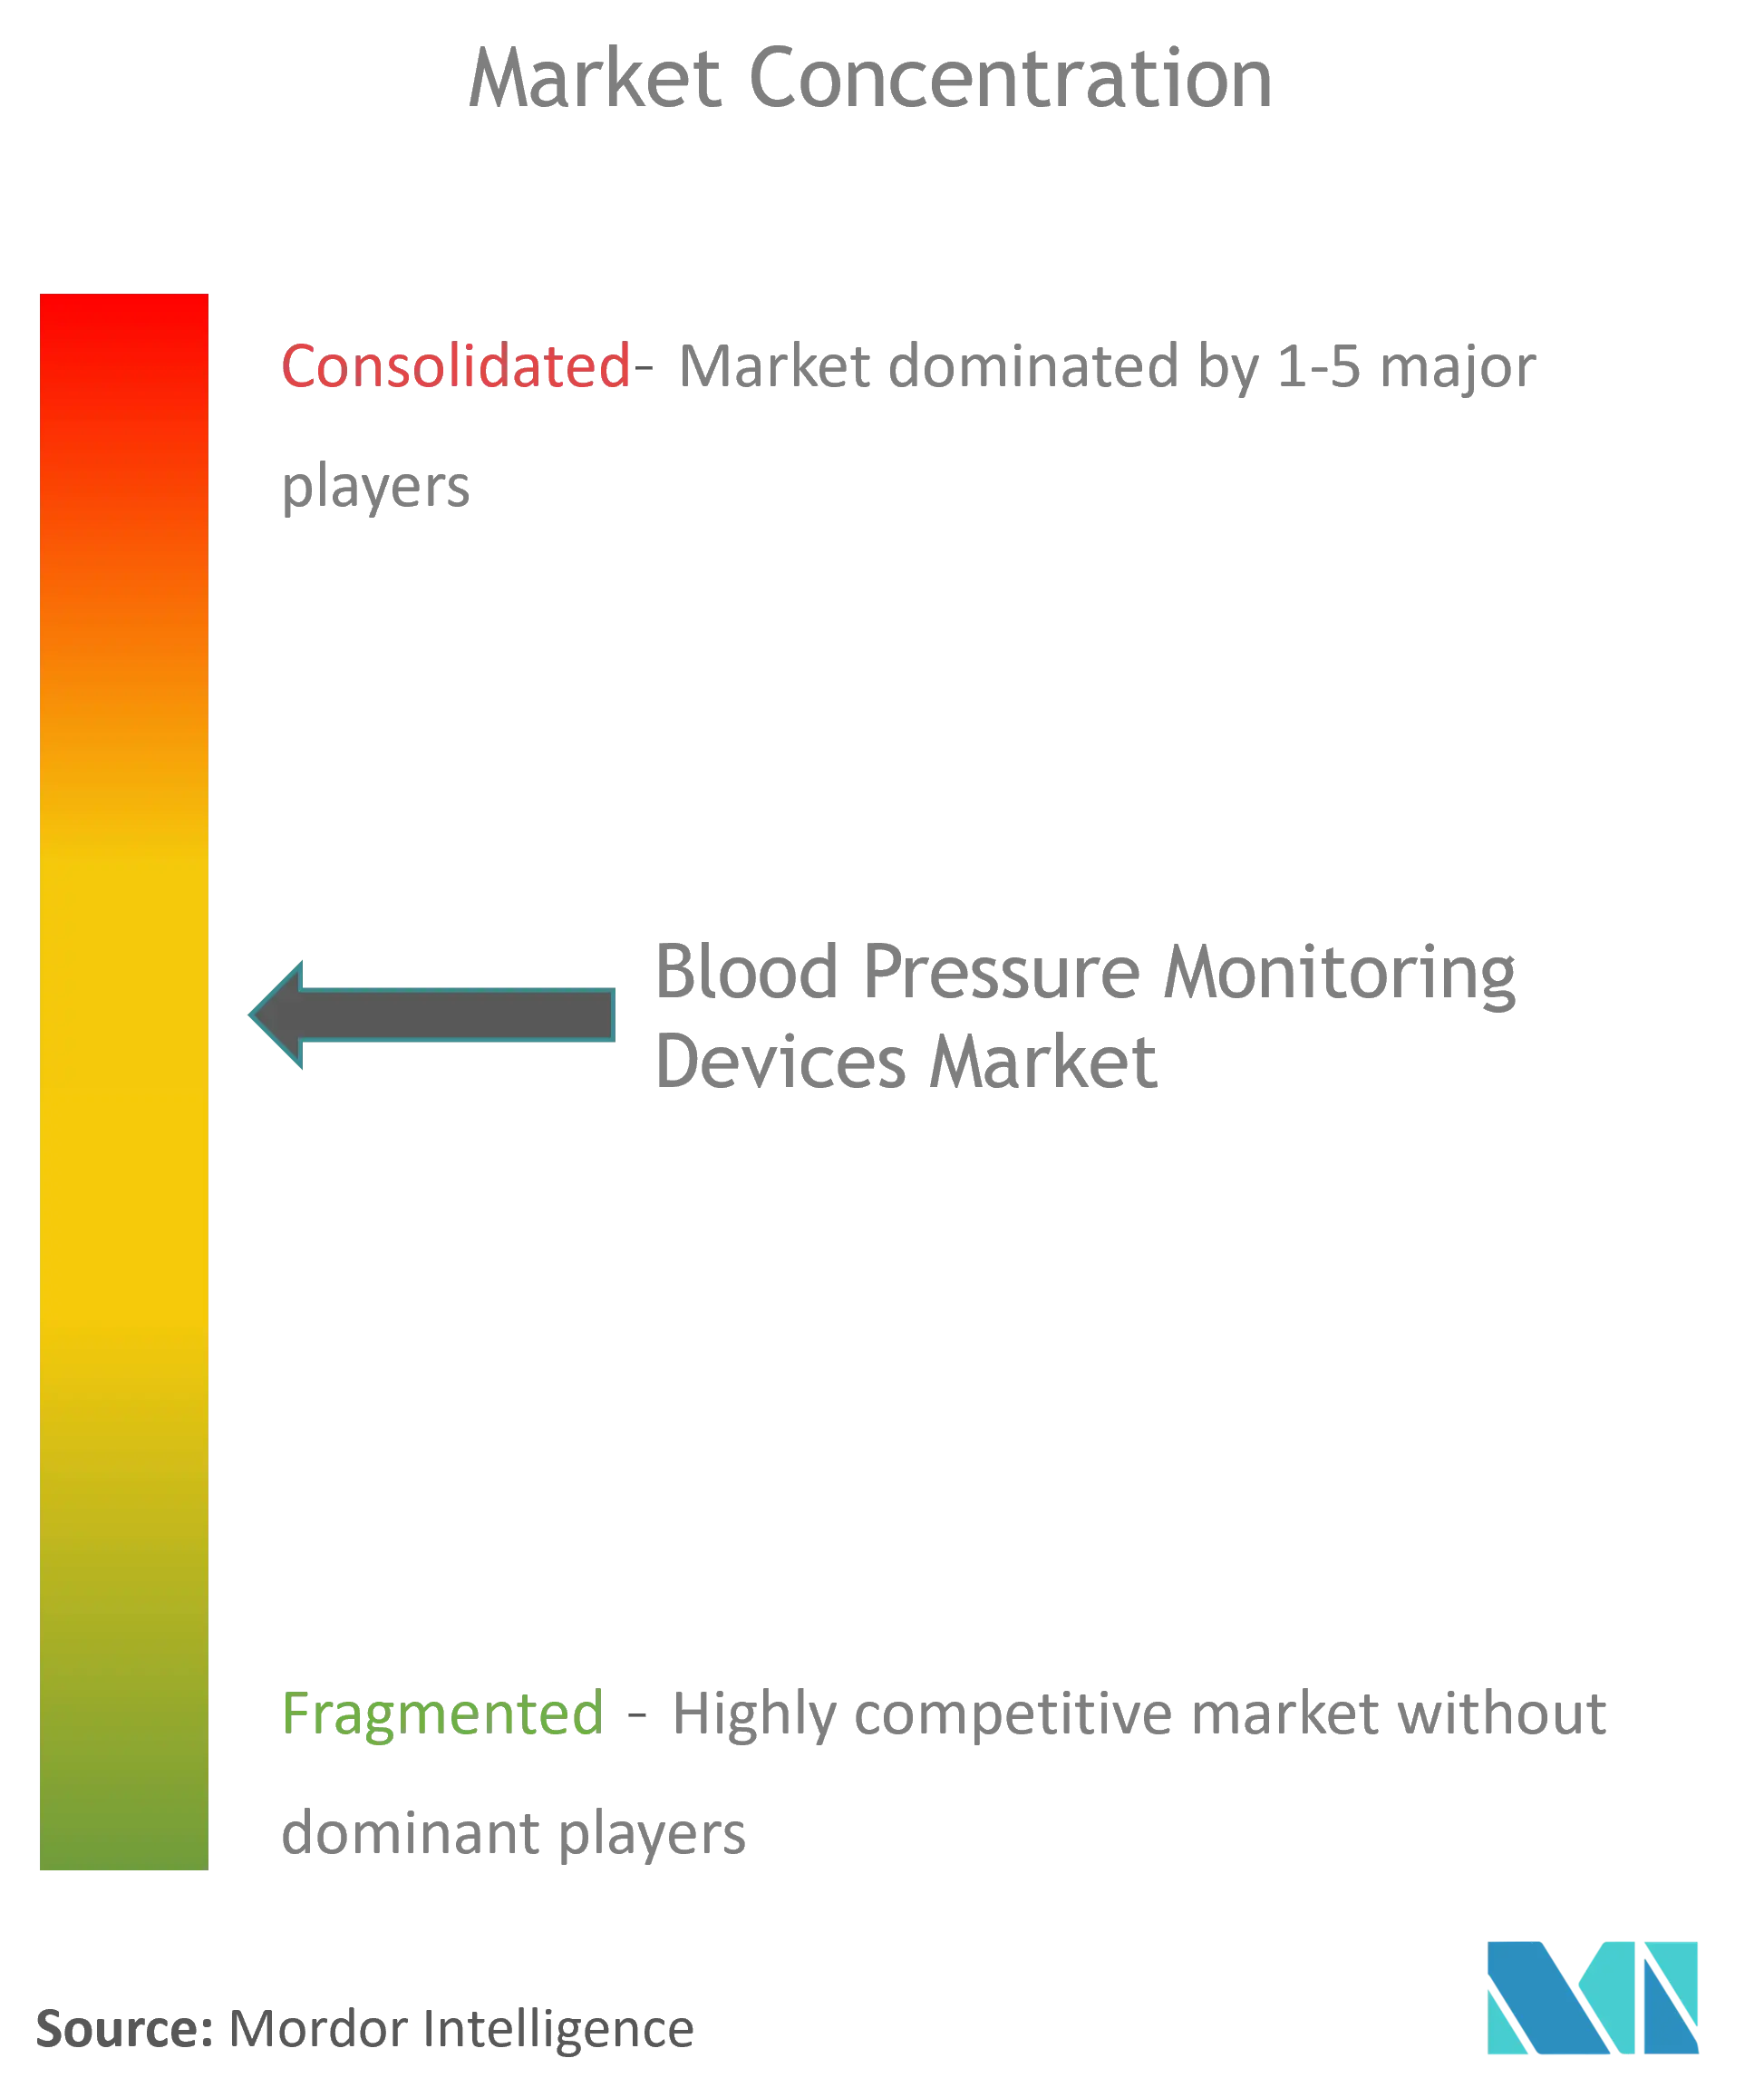 Blood Pressure Monitoring Devices Market Concentration